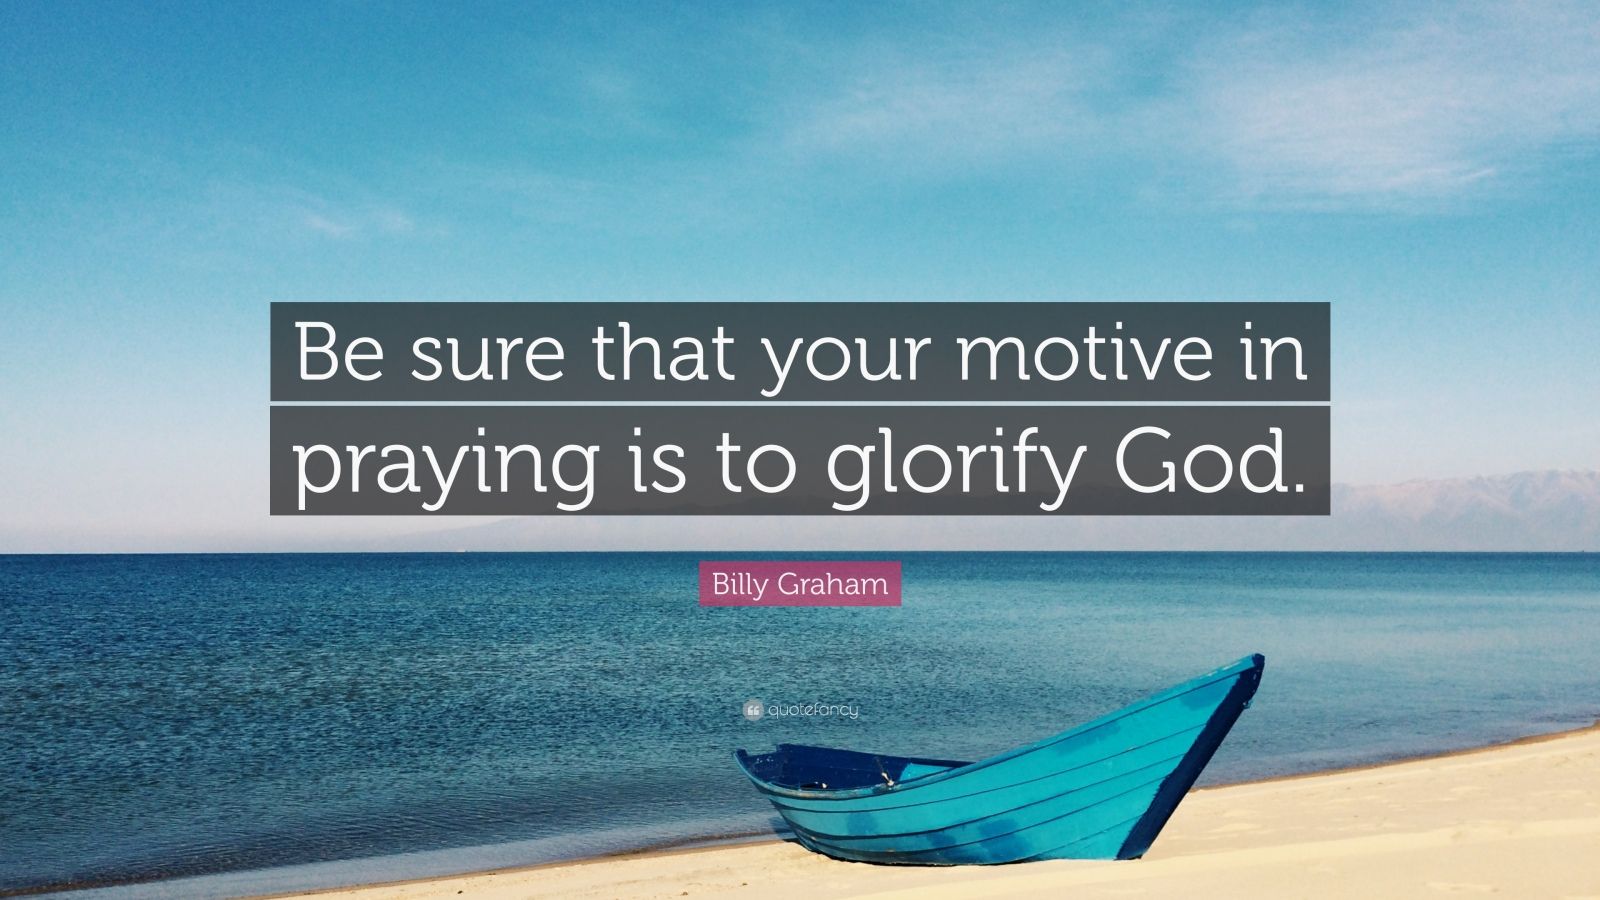 Billy Graham Quote: “Be sure that your motive in praying is to glorify